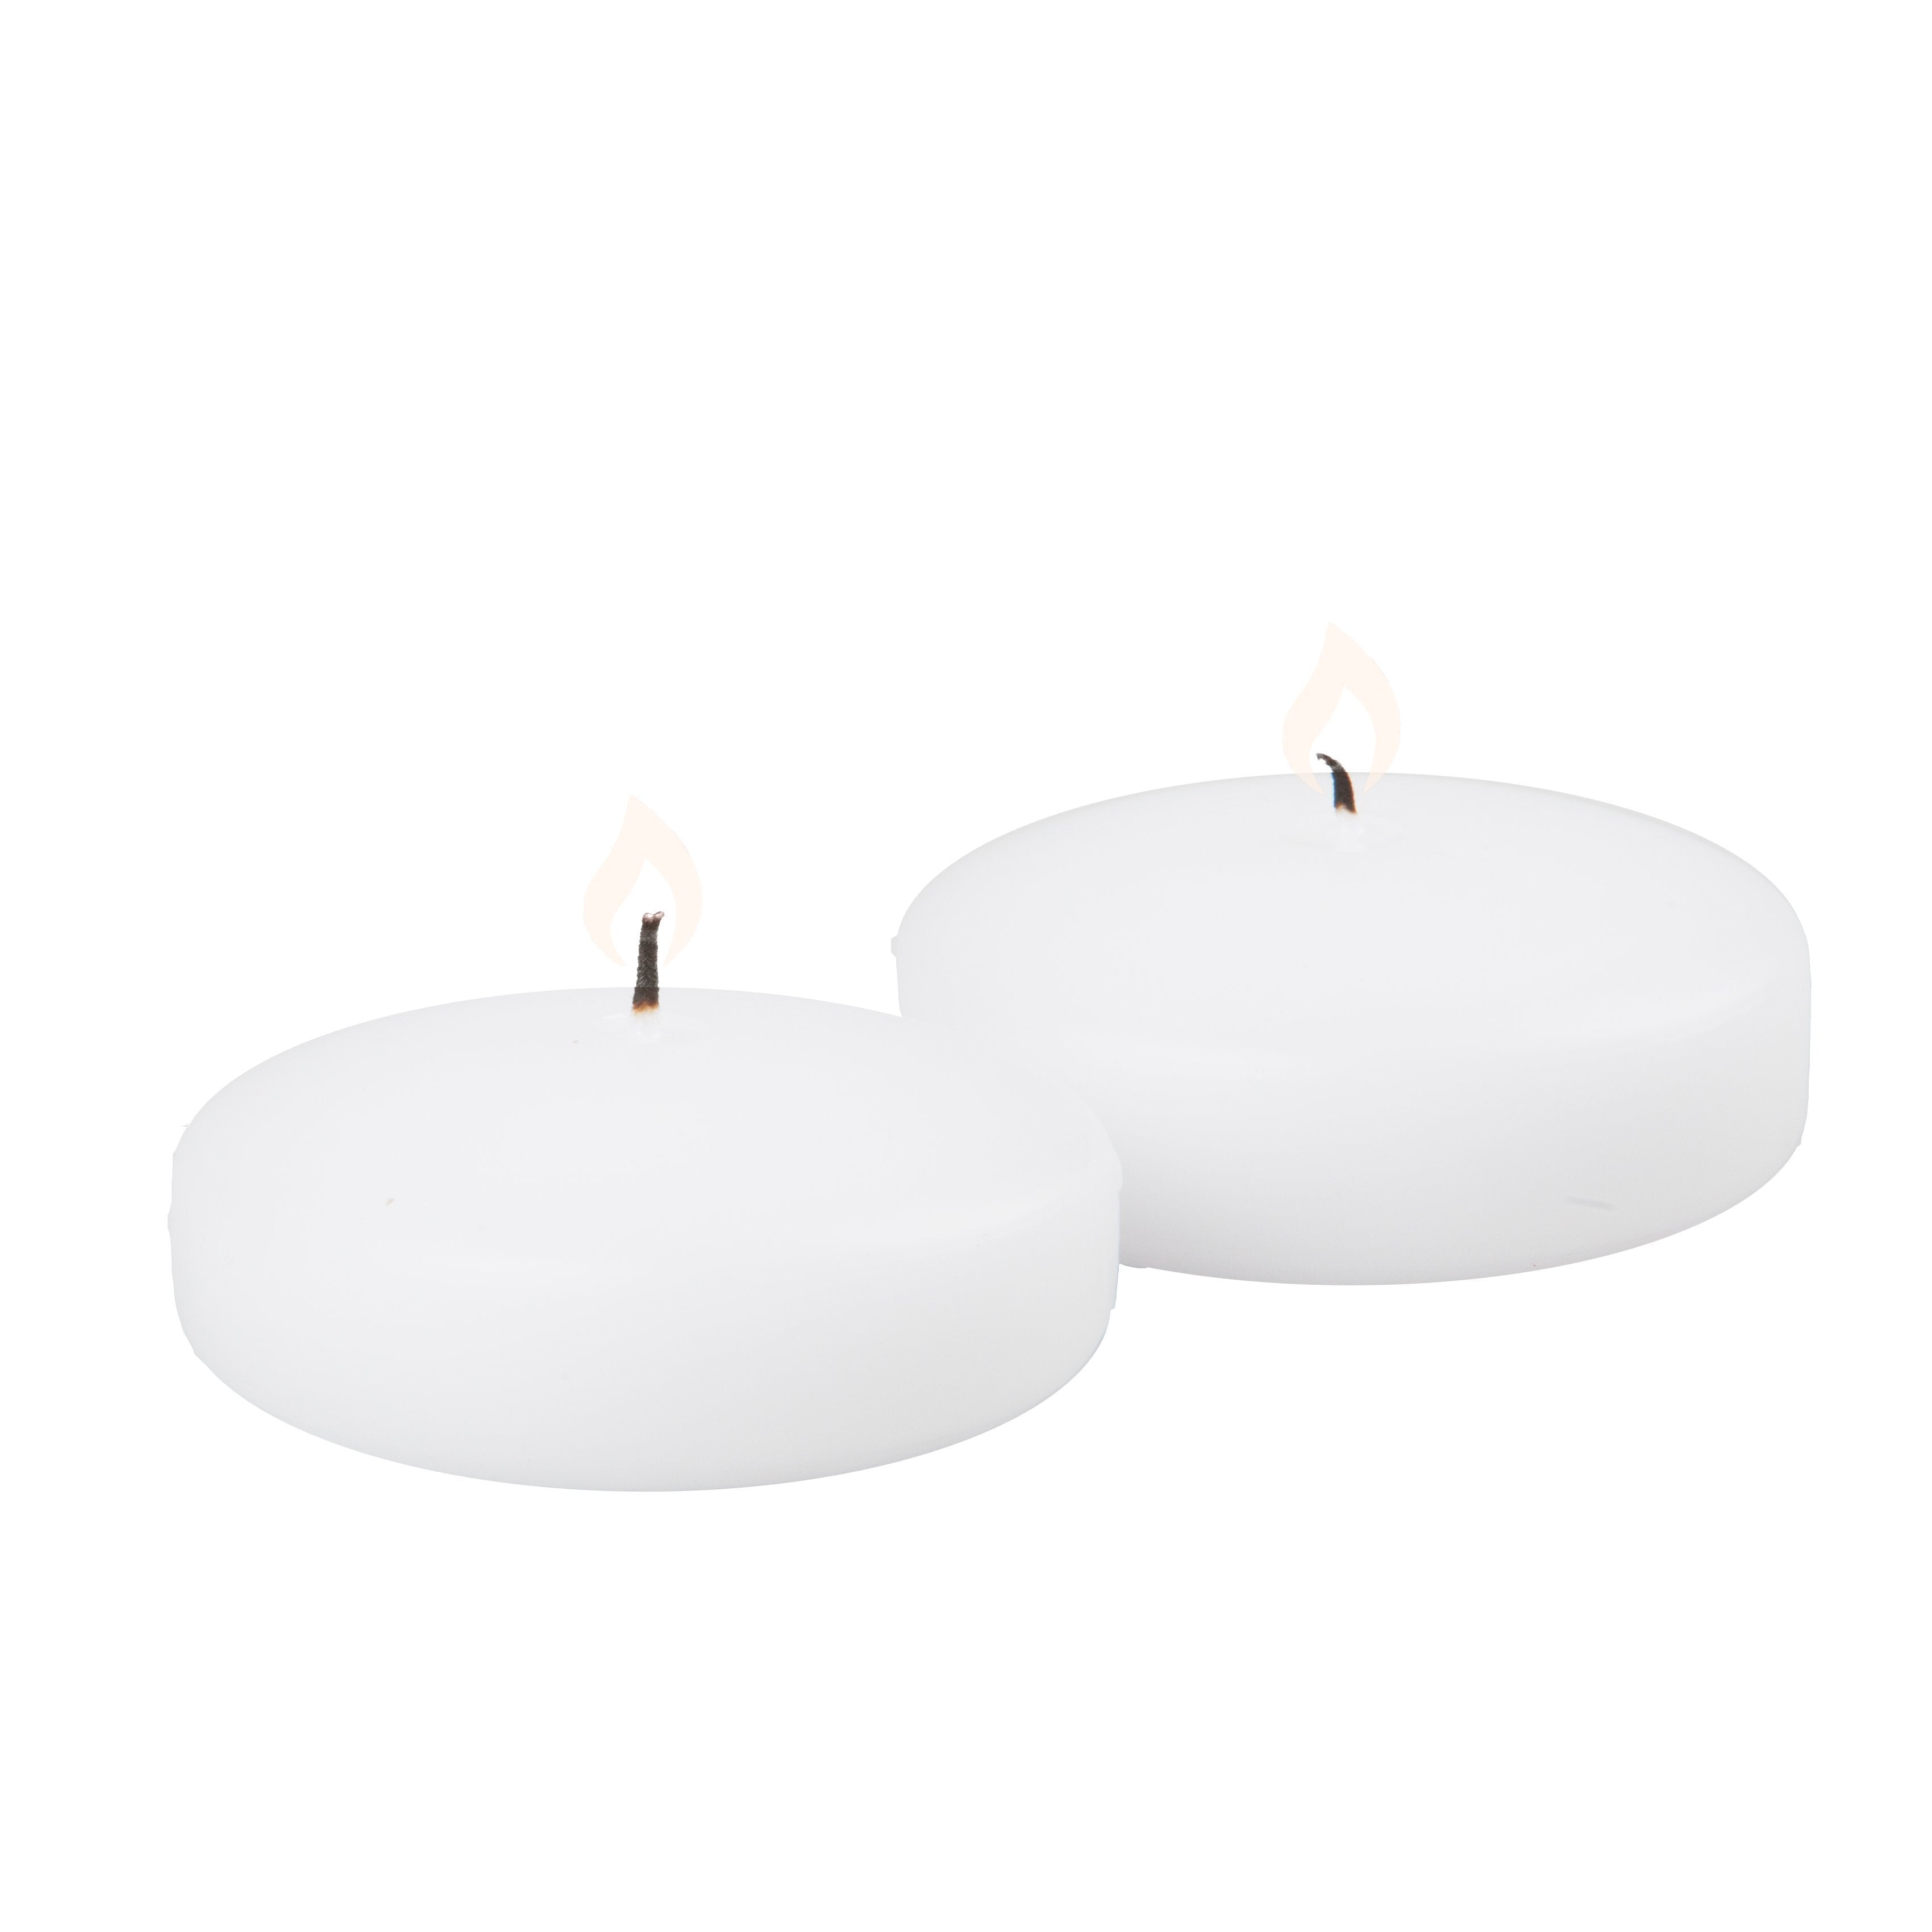 Richland Floating Candles 3 Ivory Set of 24 - Candles4Less